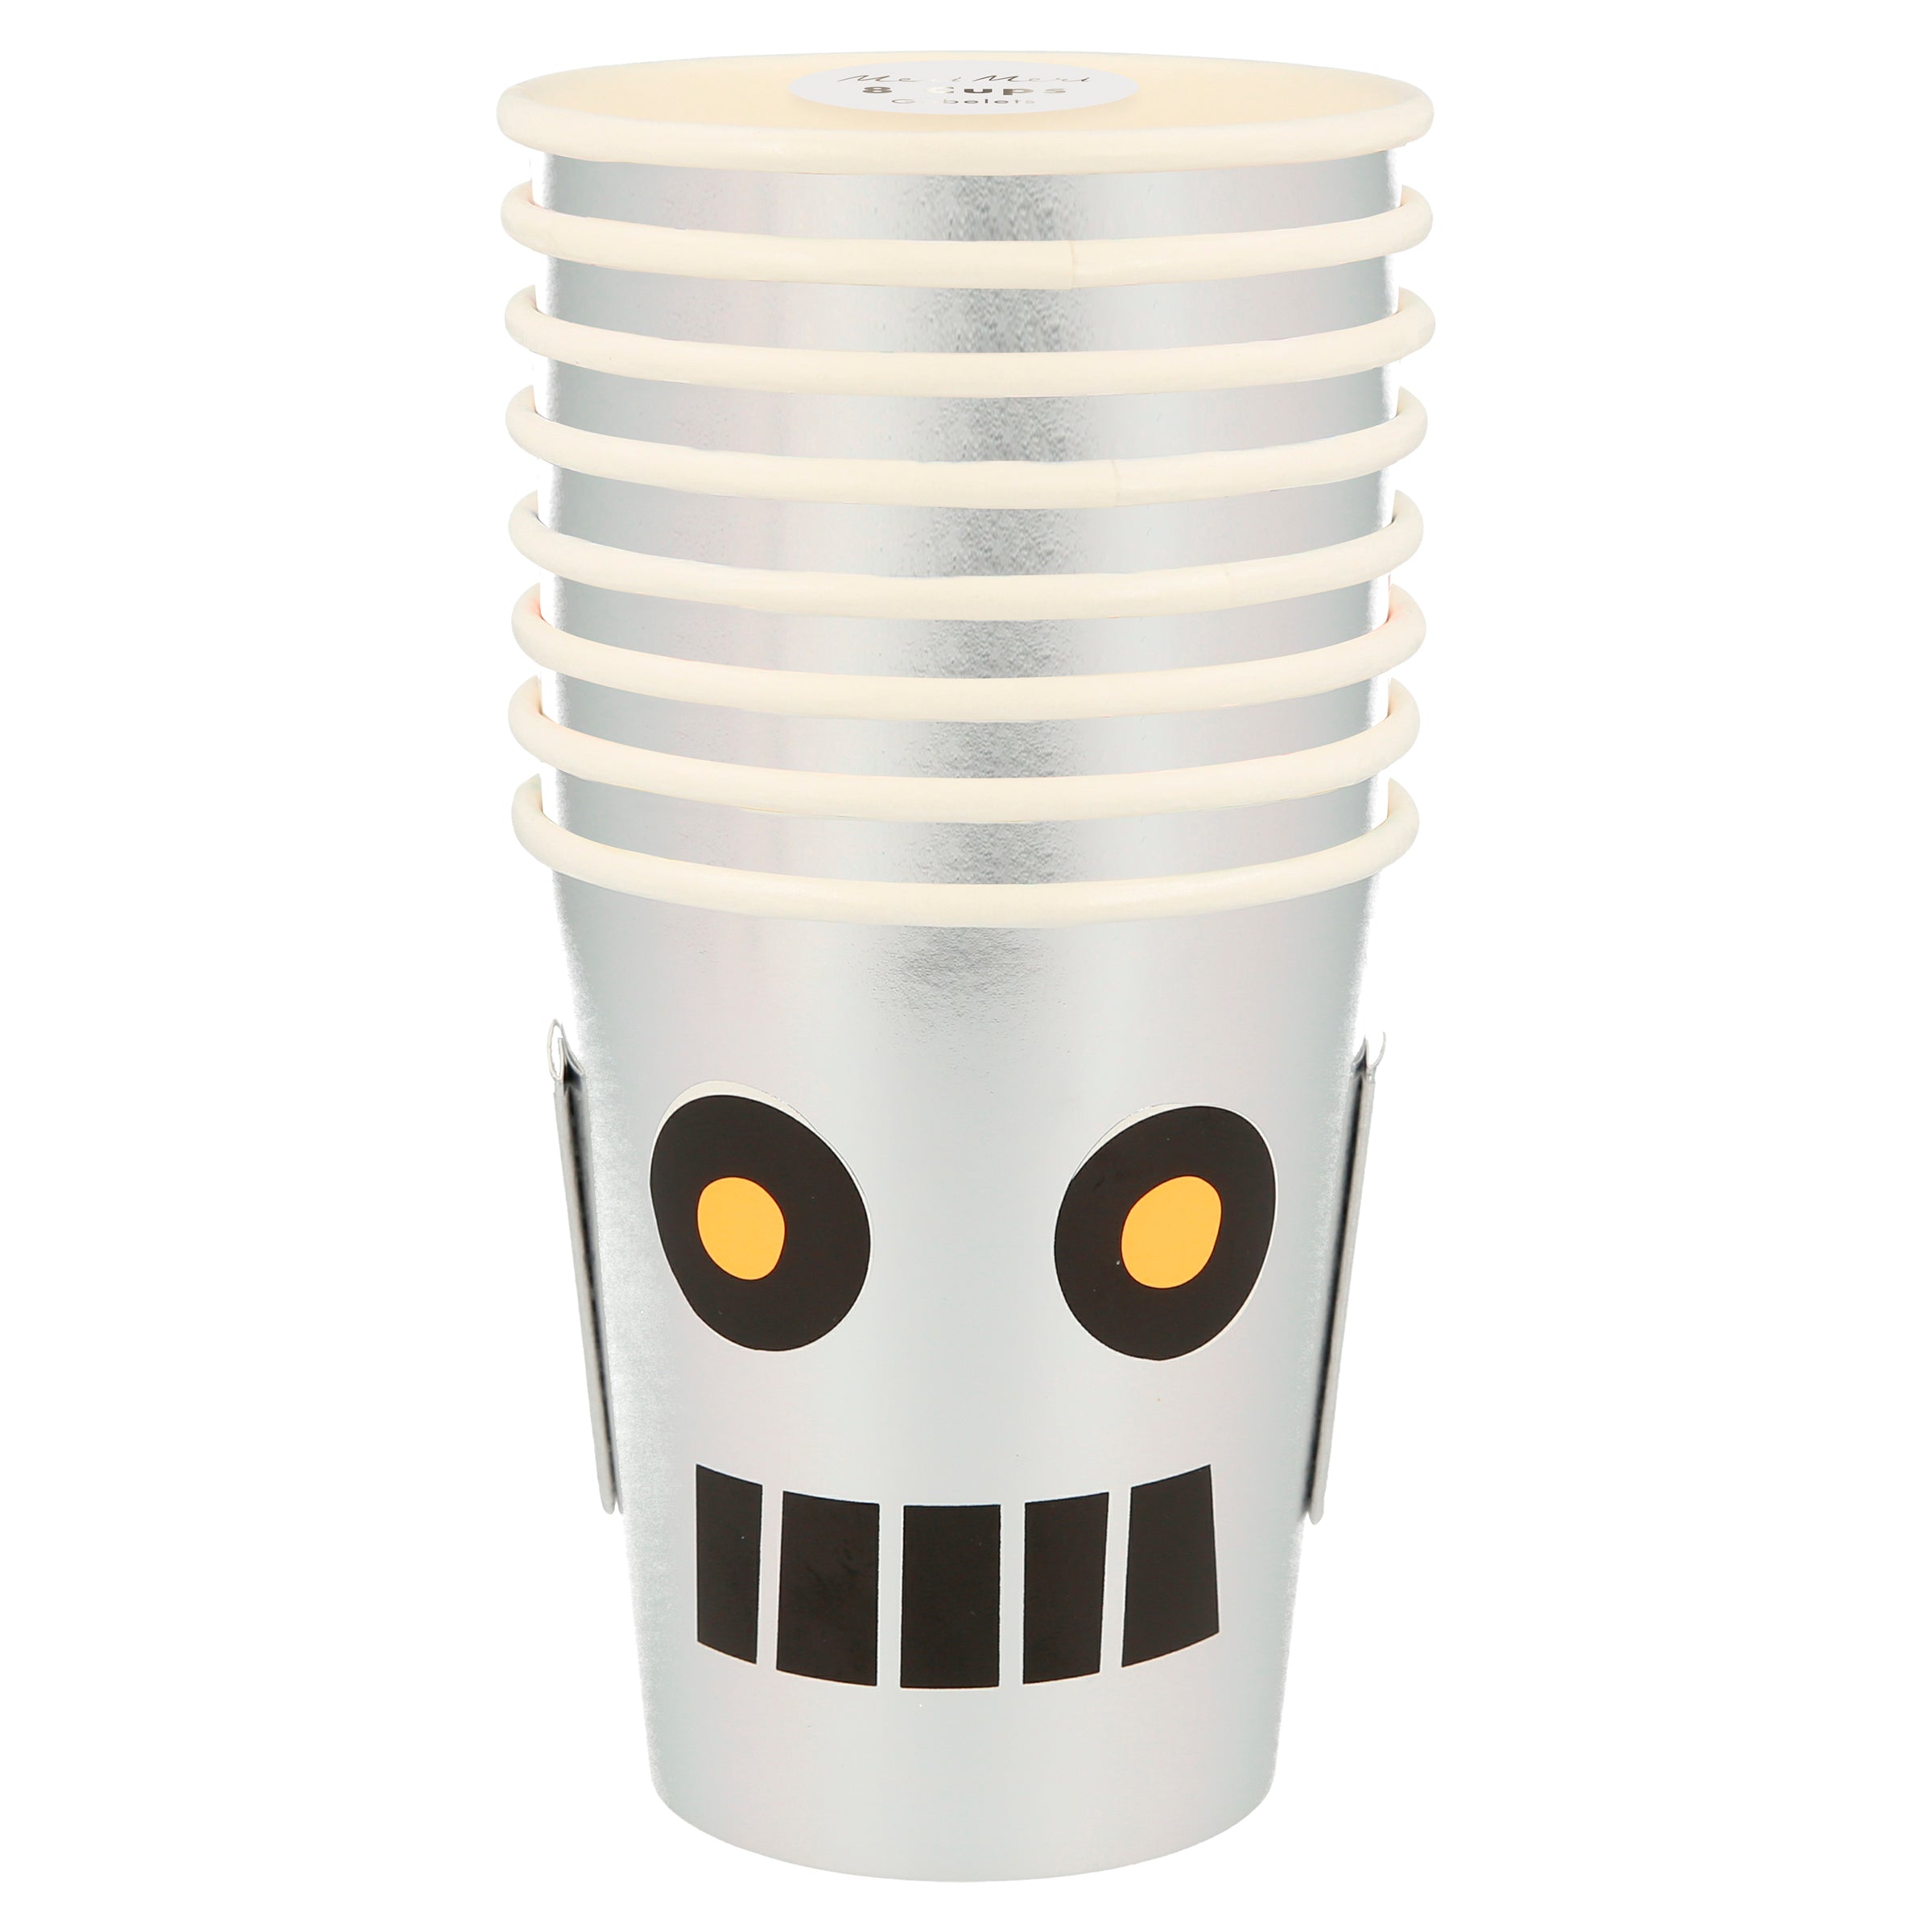 These delightful party cups feature 3D ears and a robot face, the shiny silver cups will look great at a space birthday party.